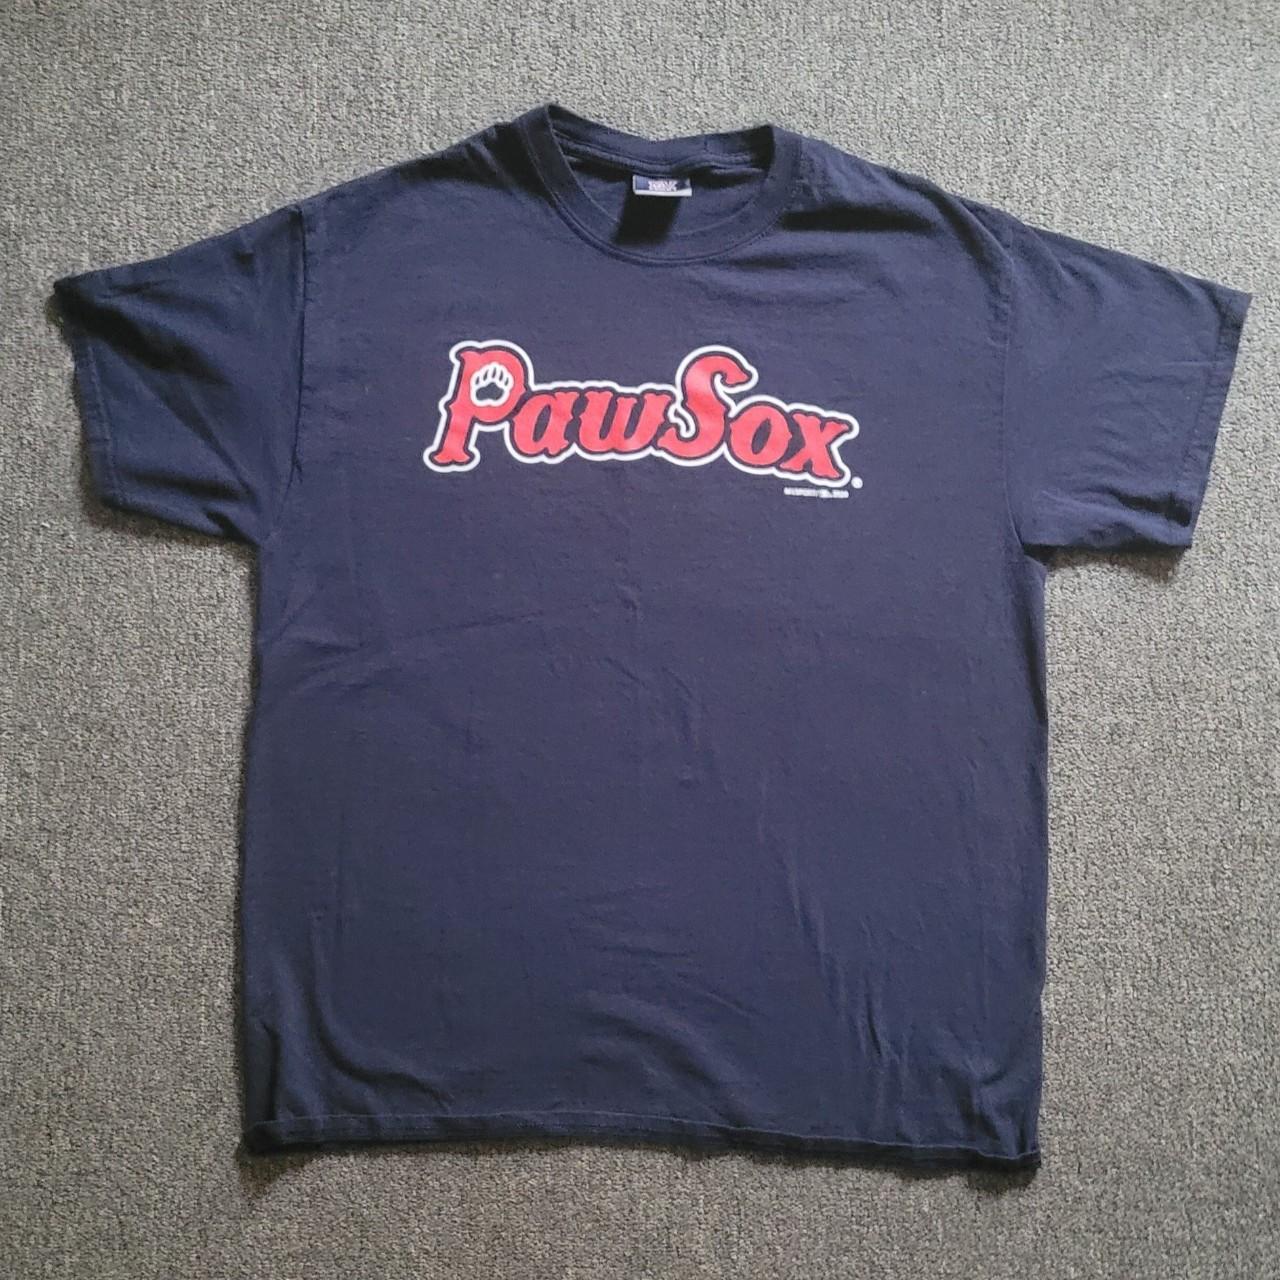 Pawtucket Red Sox t shirt in size L mens. The shirt - Depop